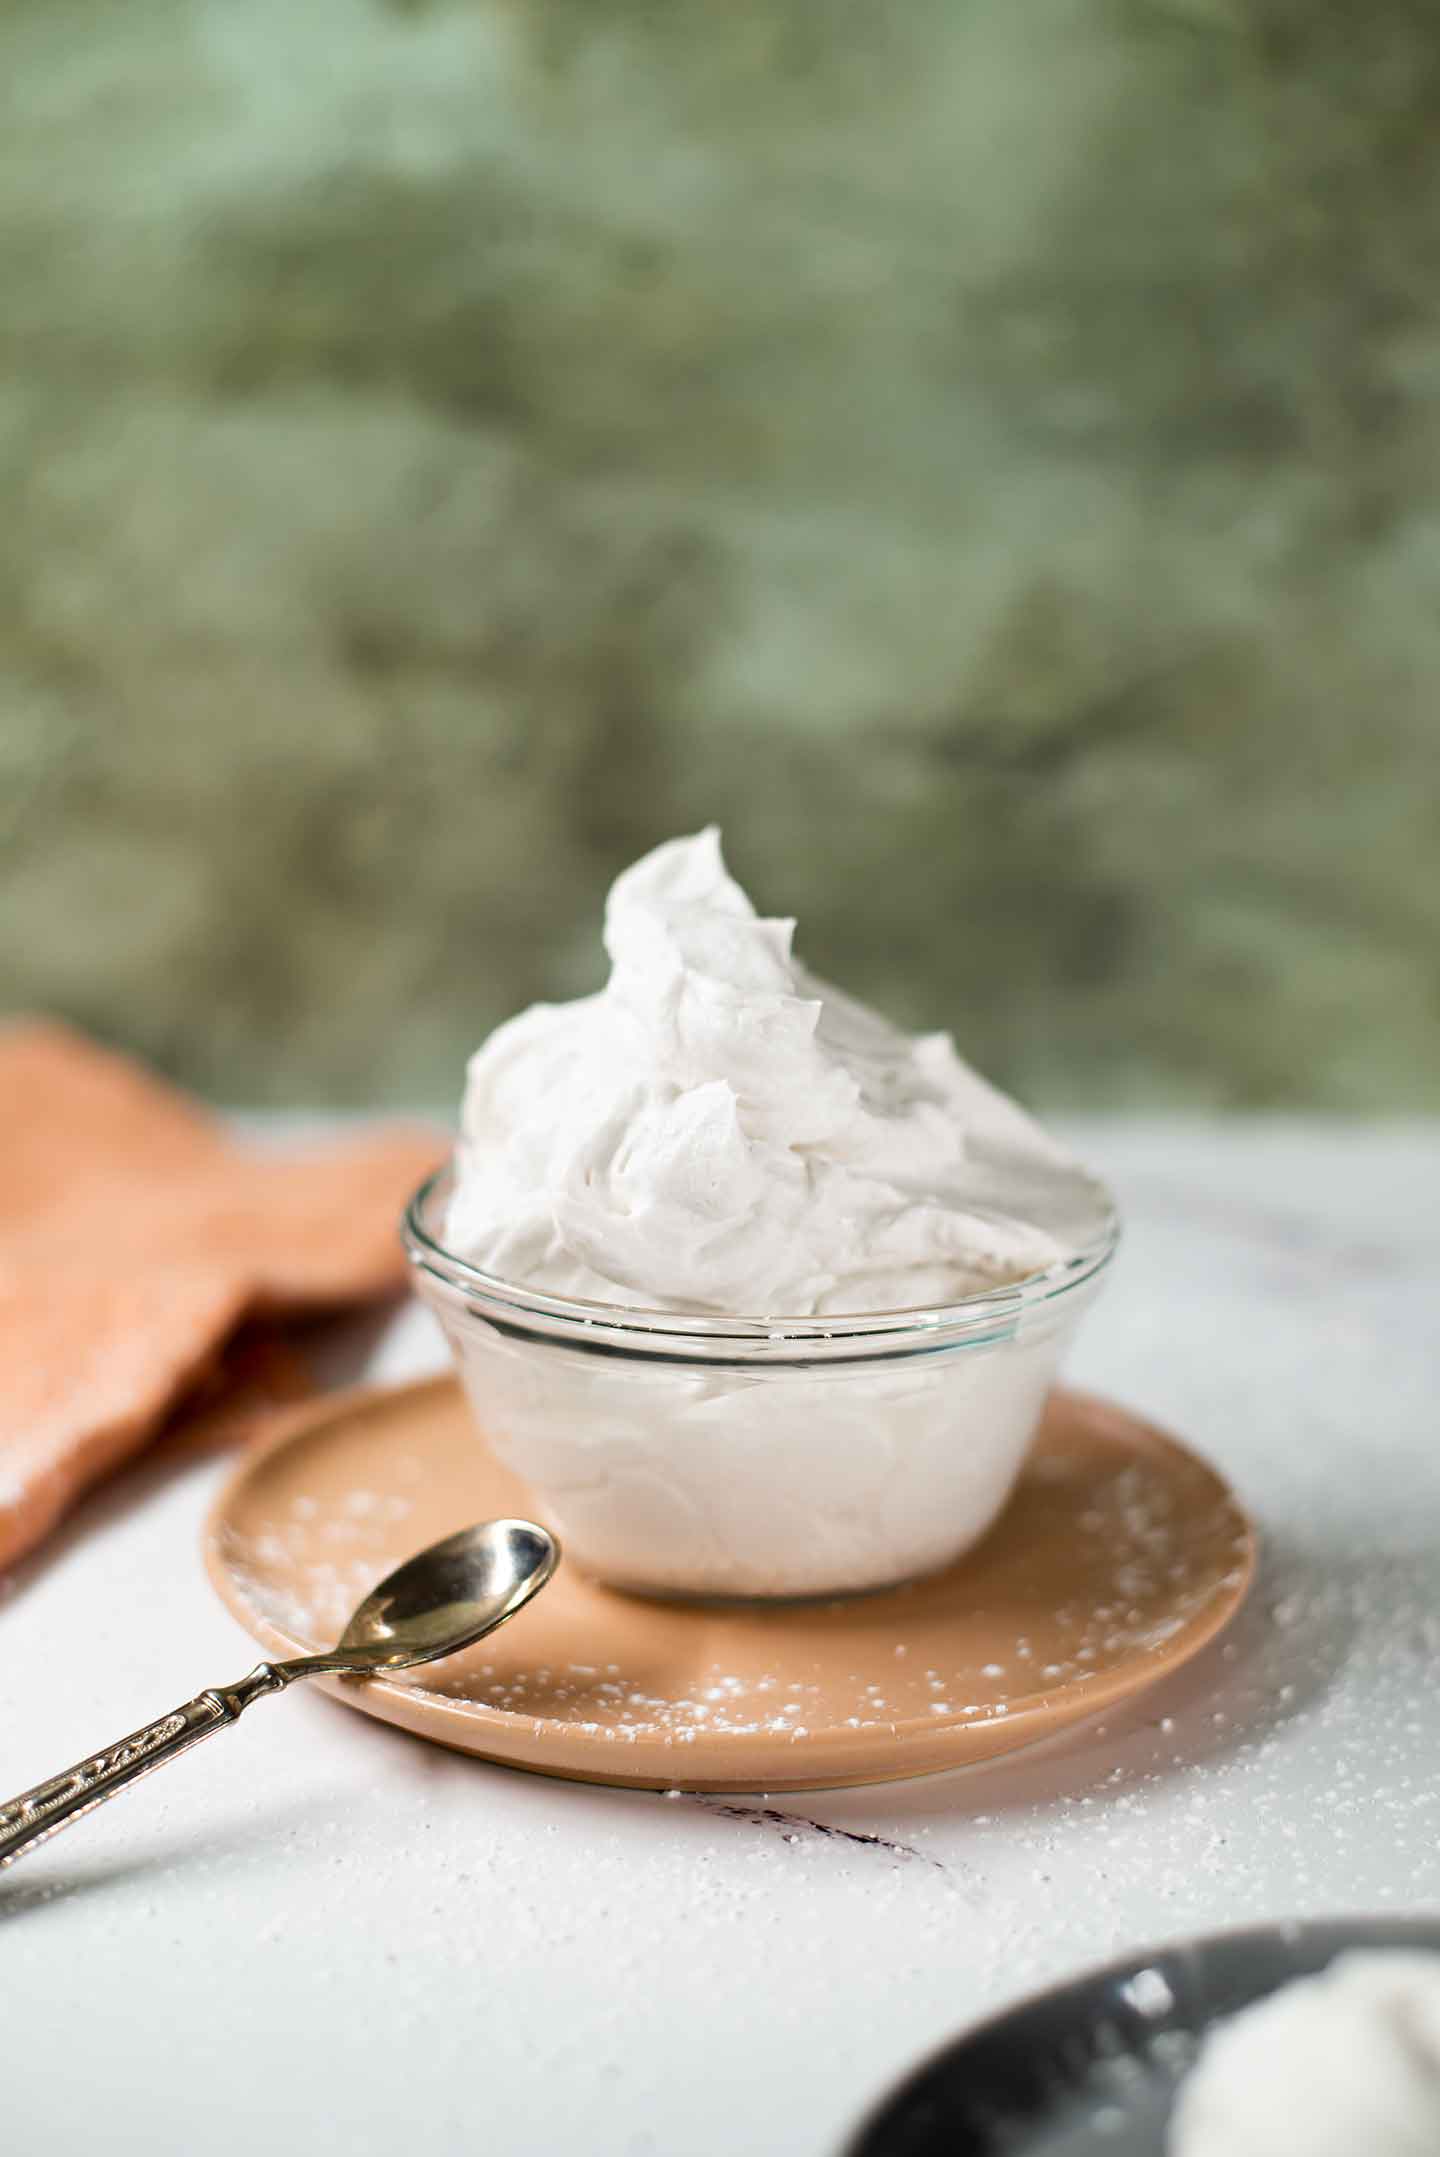 Fluffy coconut whipped cream fills a small glass bowl. The cream billows up from the bowl like clouds.